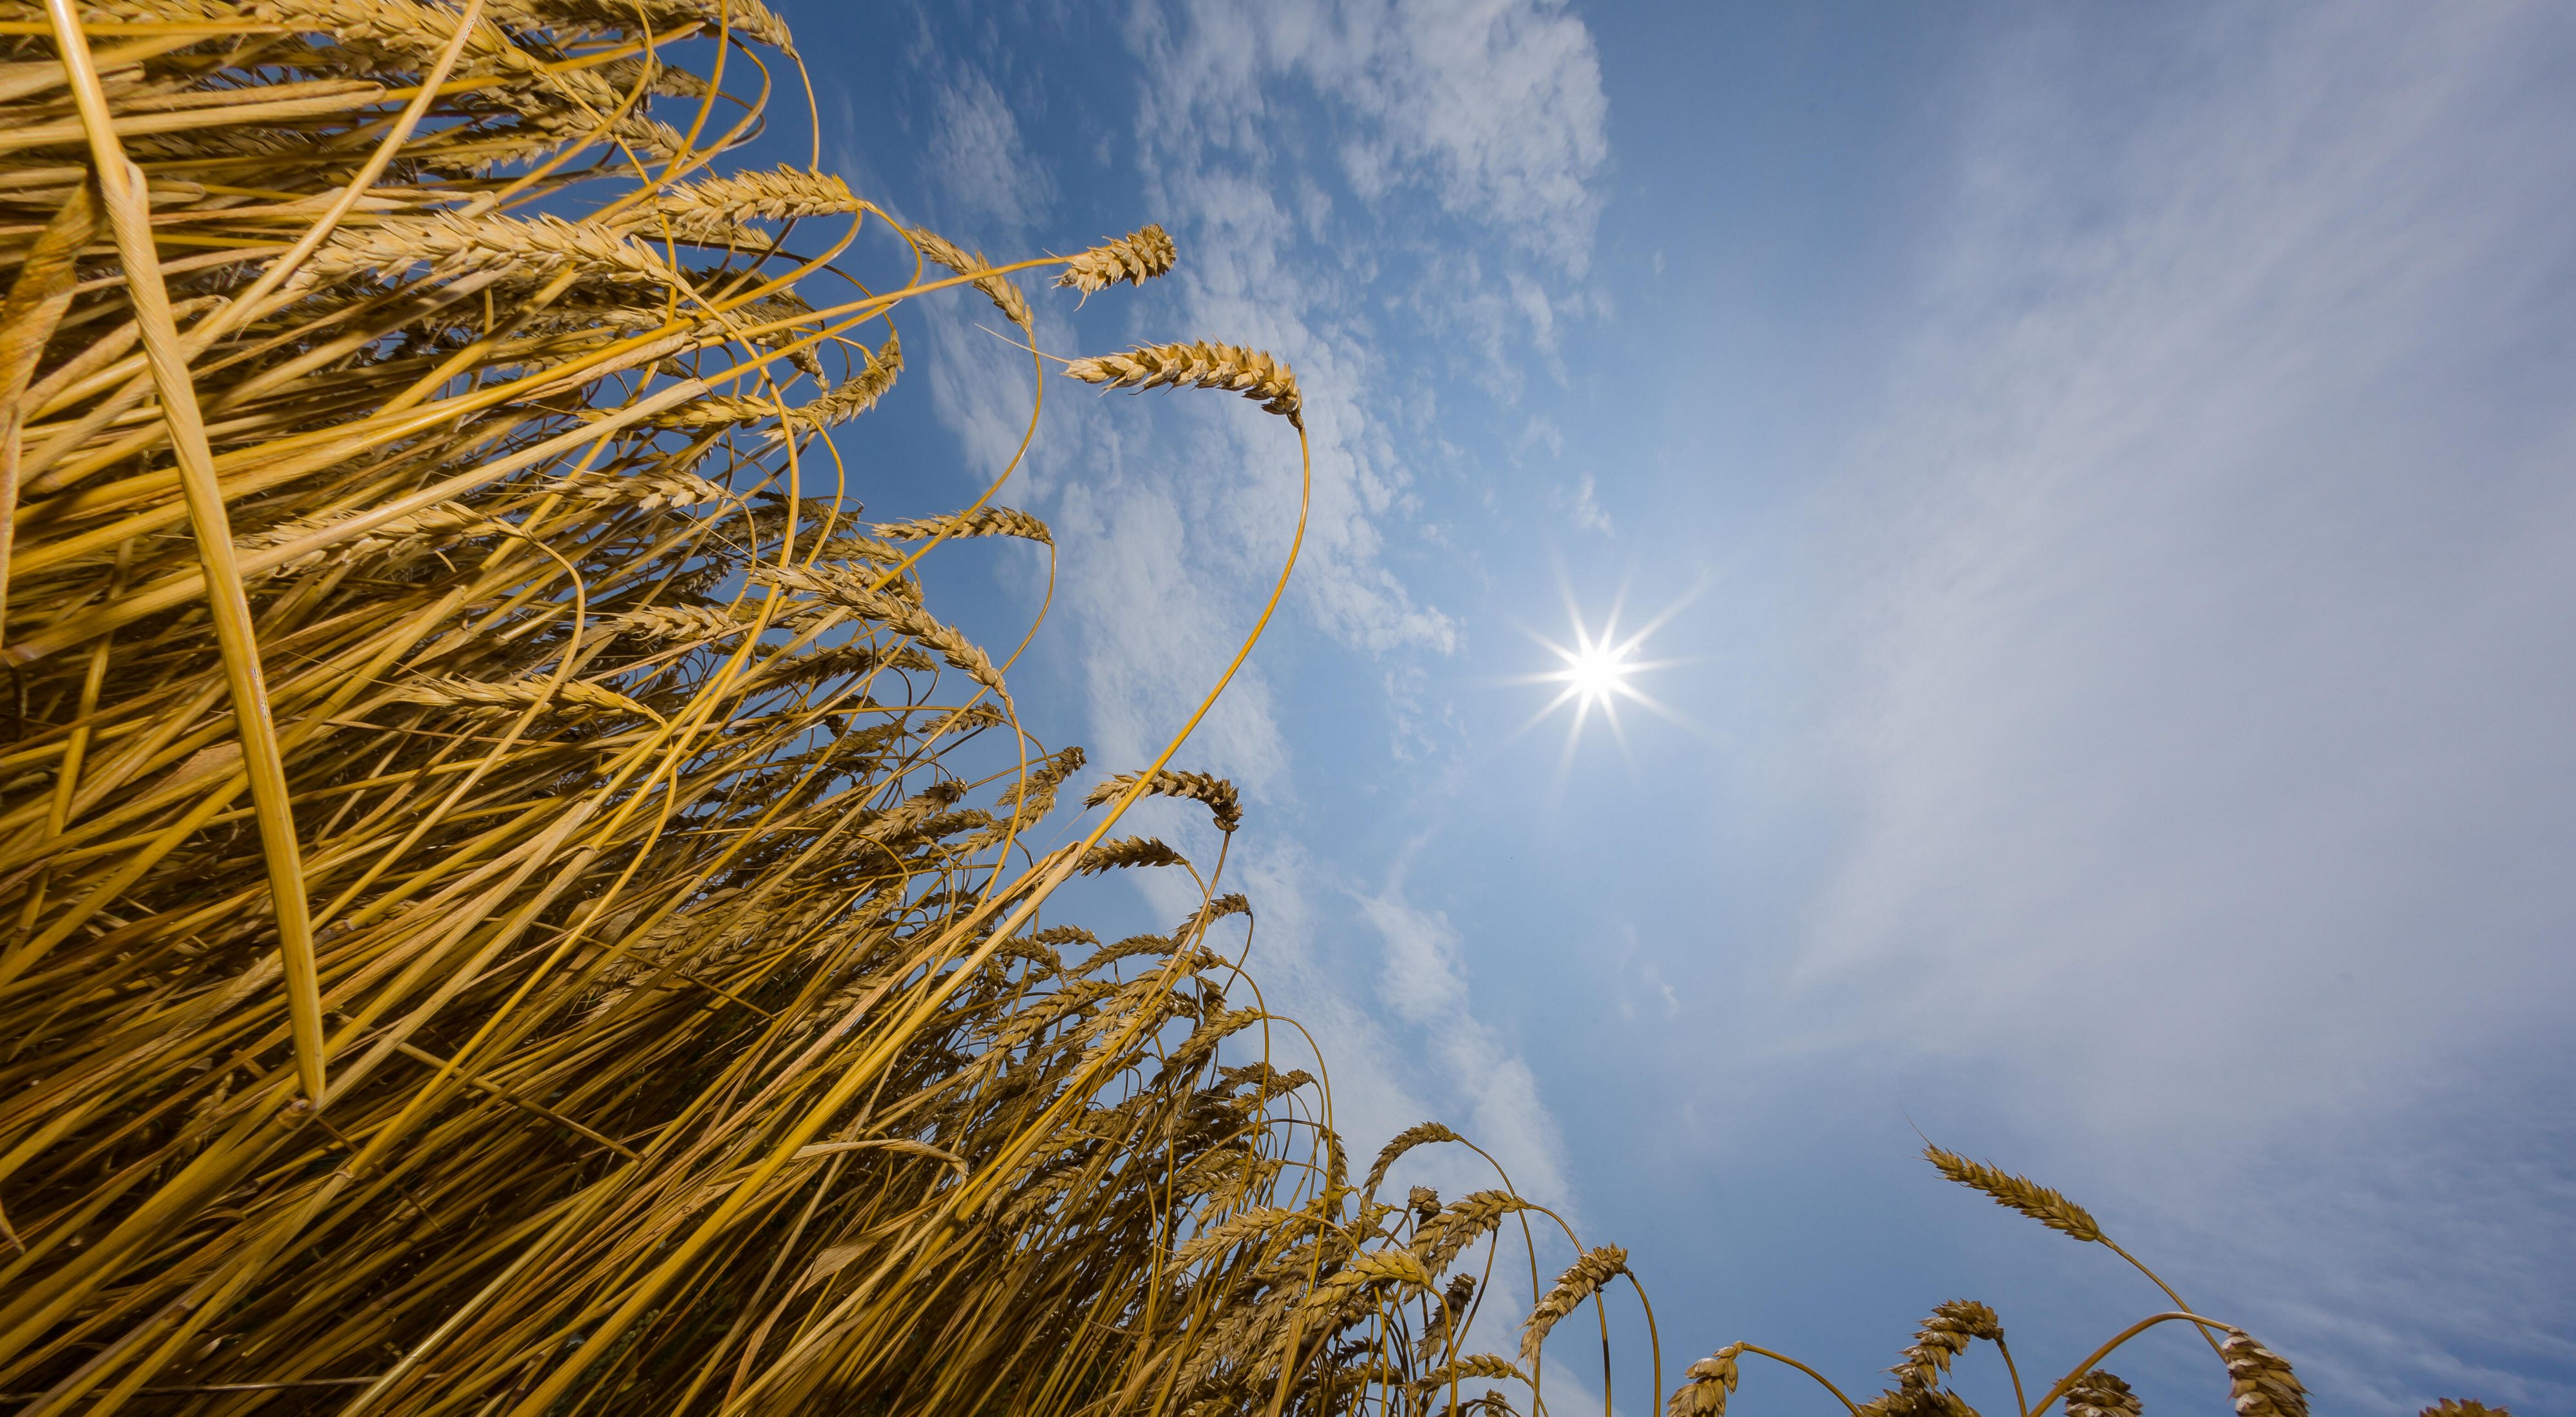 A sun shines over a field of wheat in Michigan. The sky is blue and dotted with clouds. 